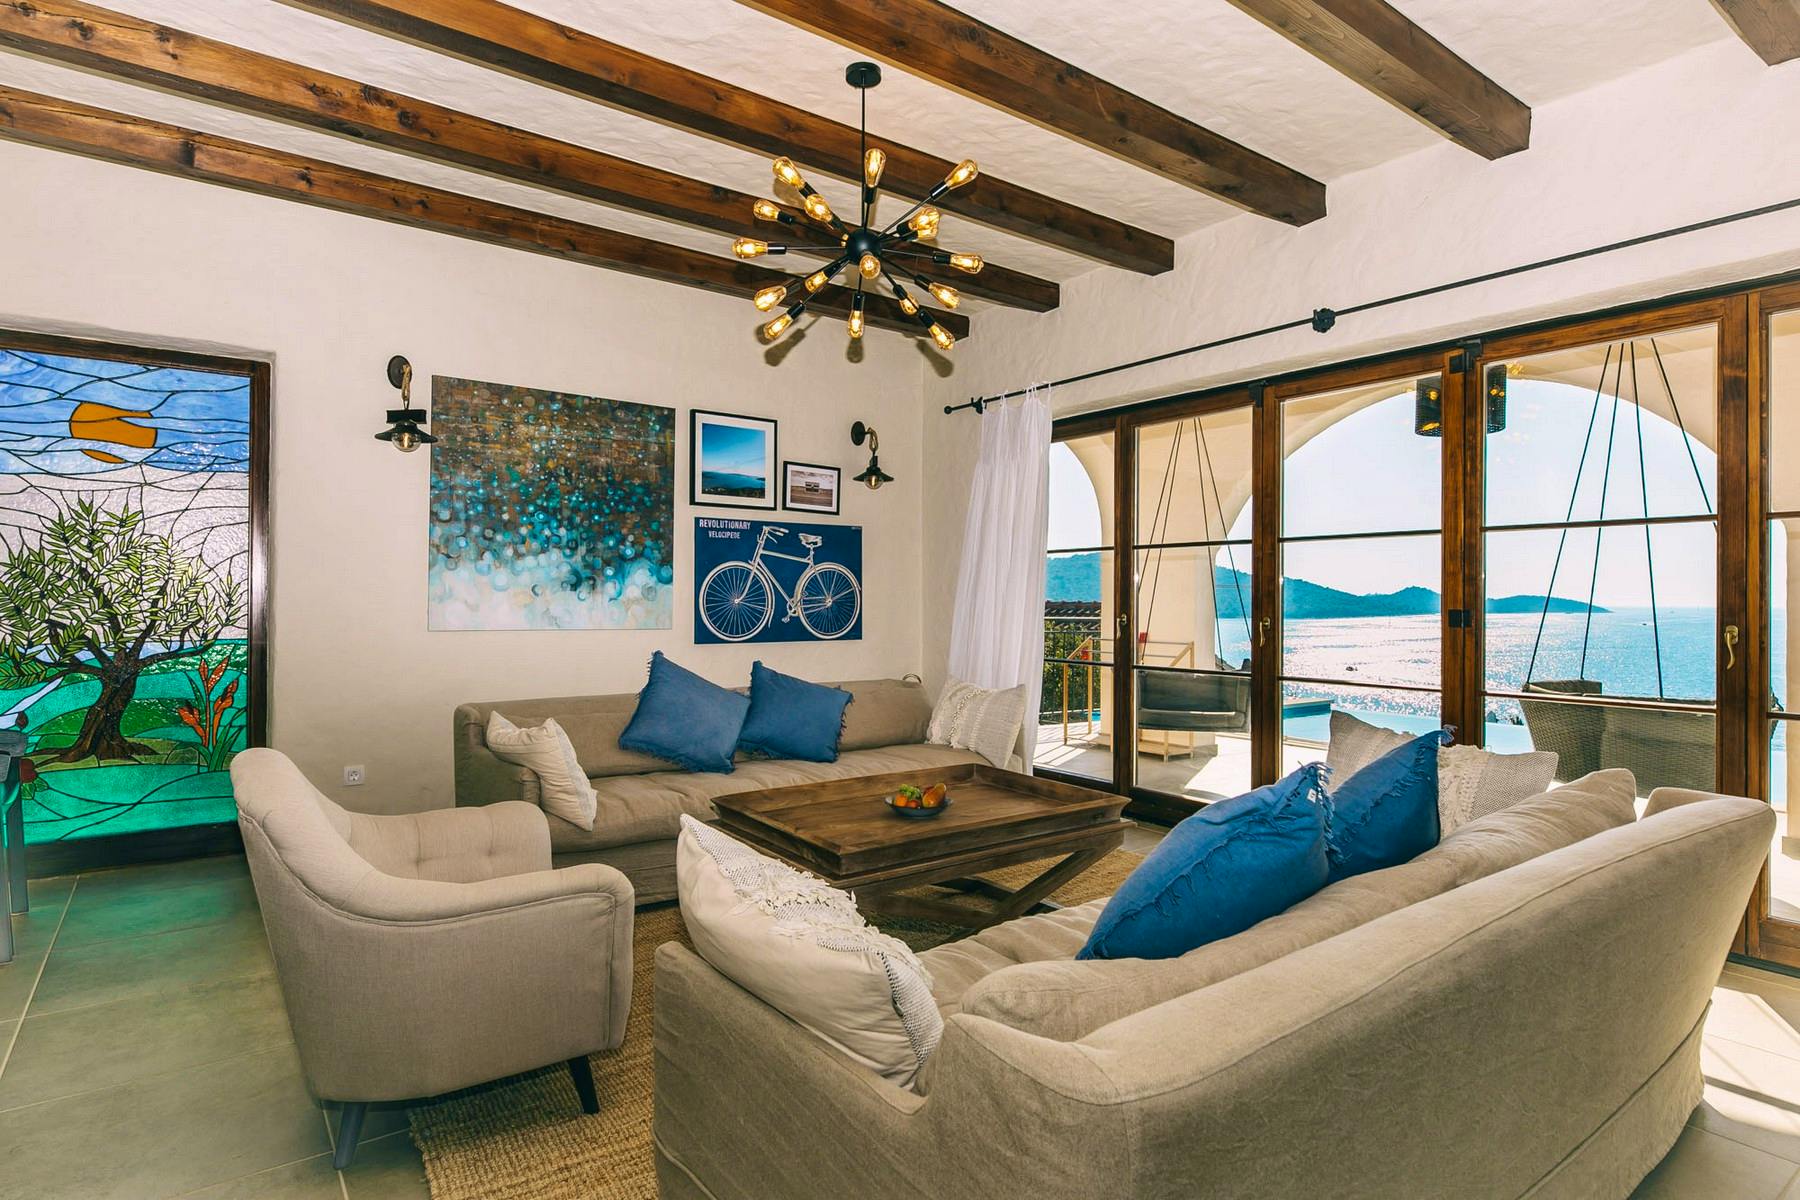 Spacious living room with sea view